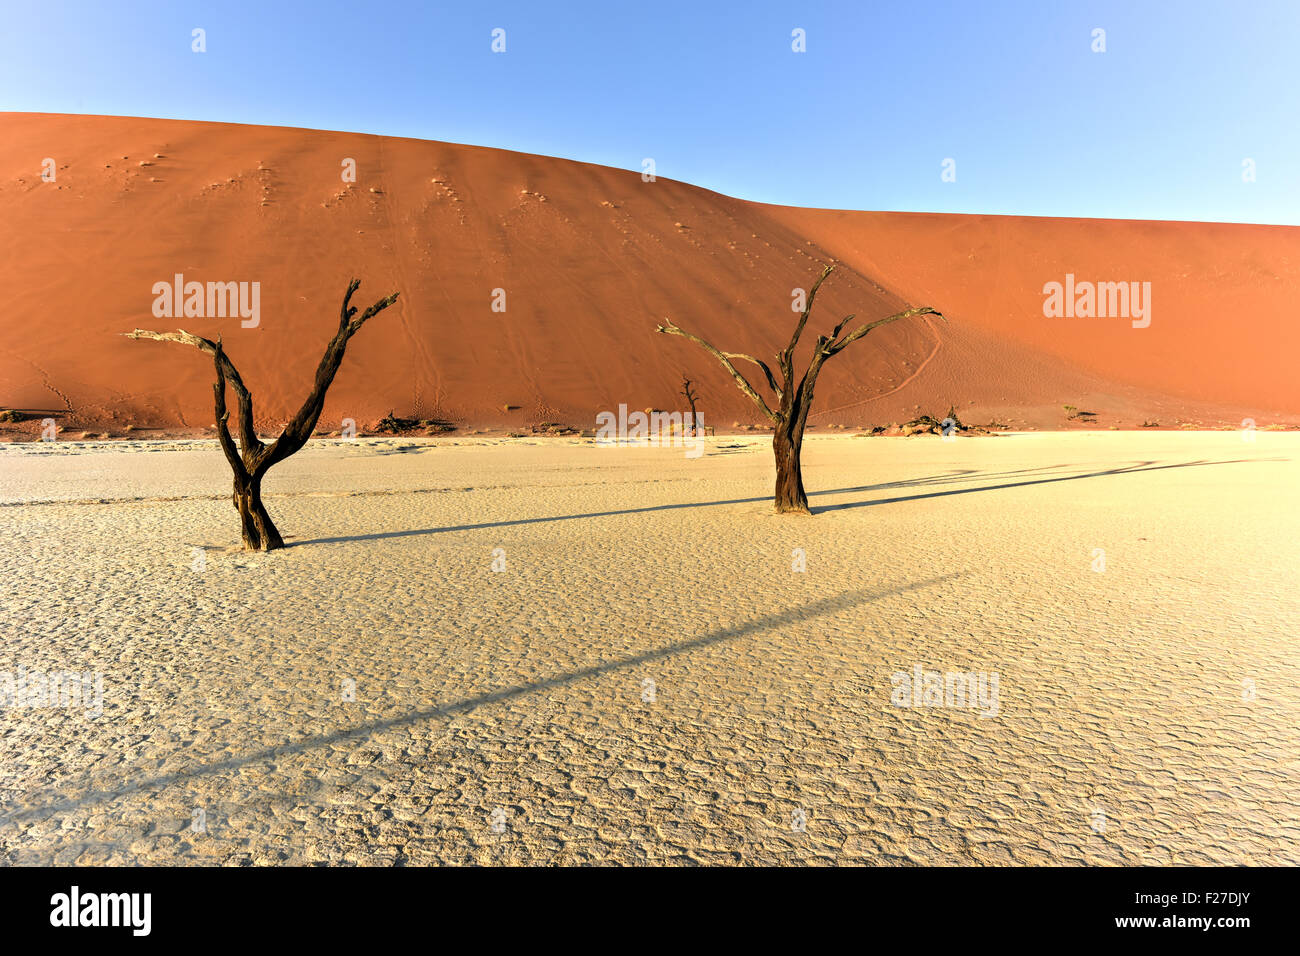 Dead Vlei in the southern part of the Namib Desert, in the Namib-Naukluft National Park of Namibia. Stock Photo